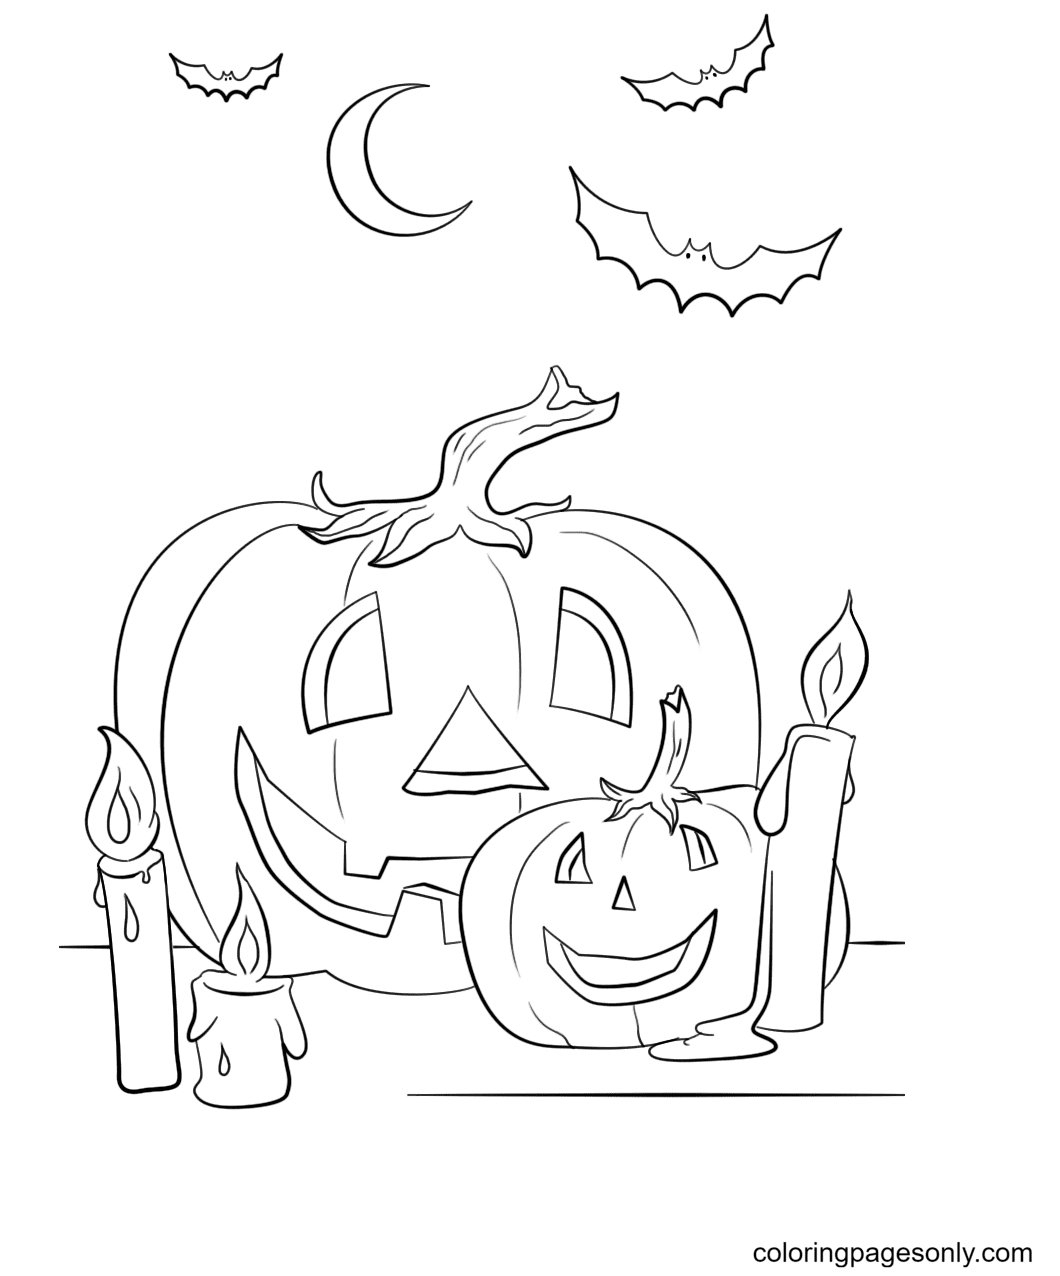 Halloween Scene With Pumpkins, Candles And Bats Coloring Pages